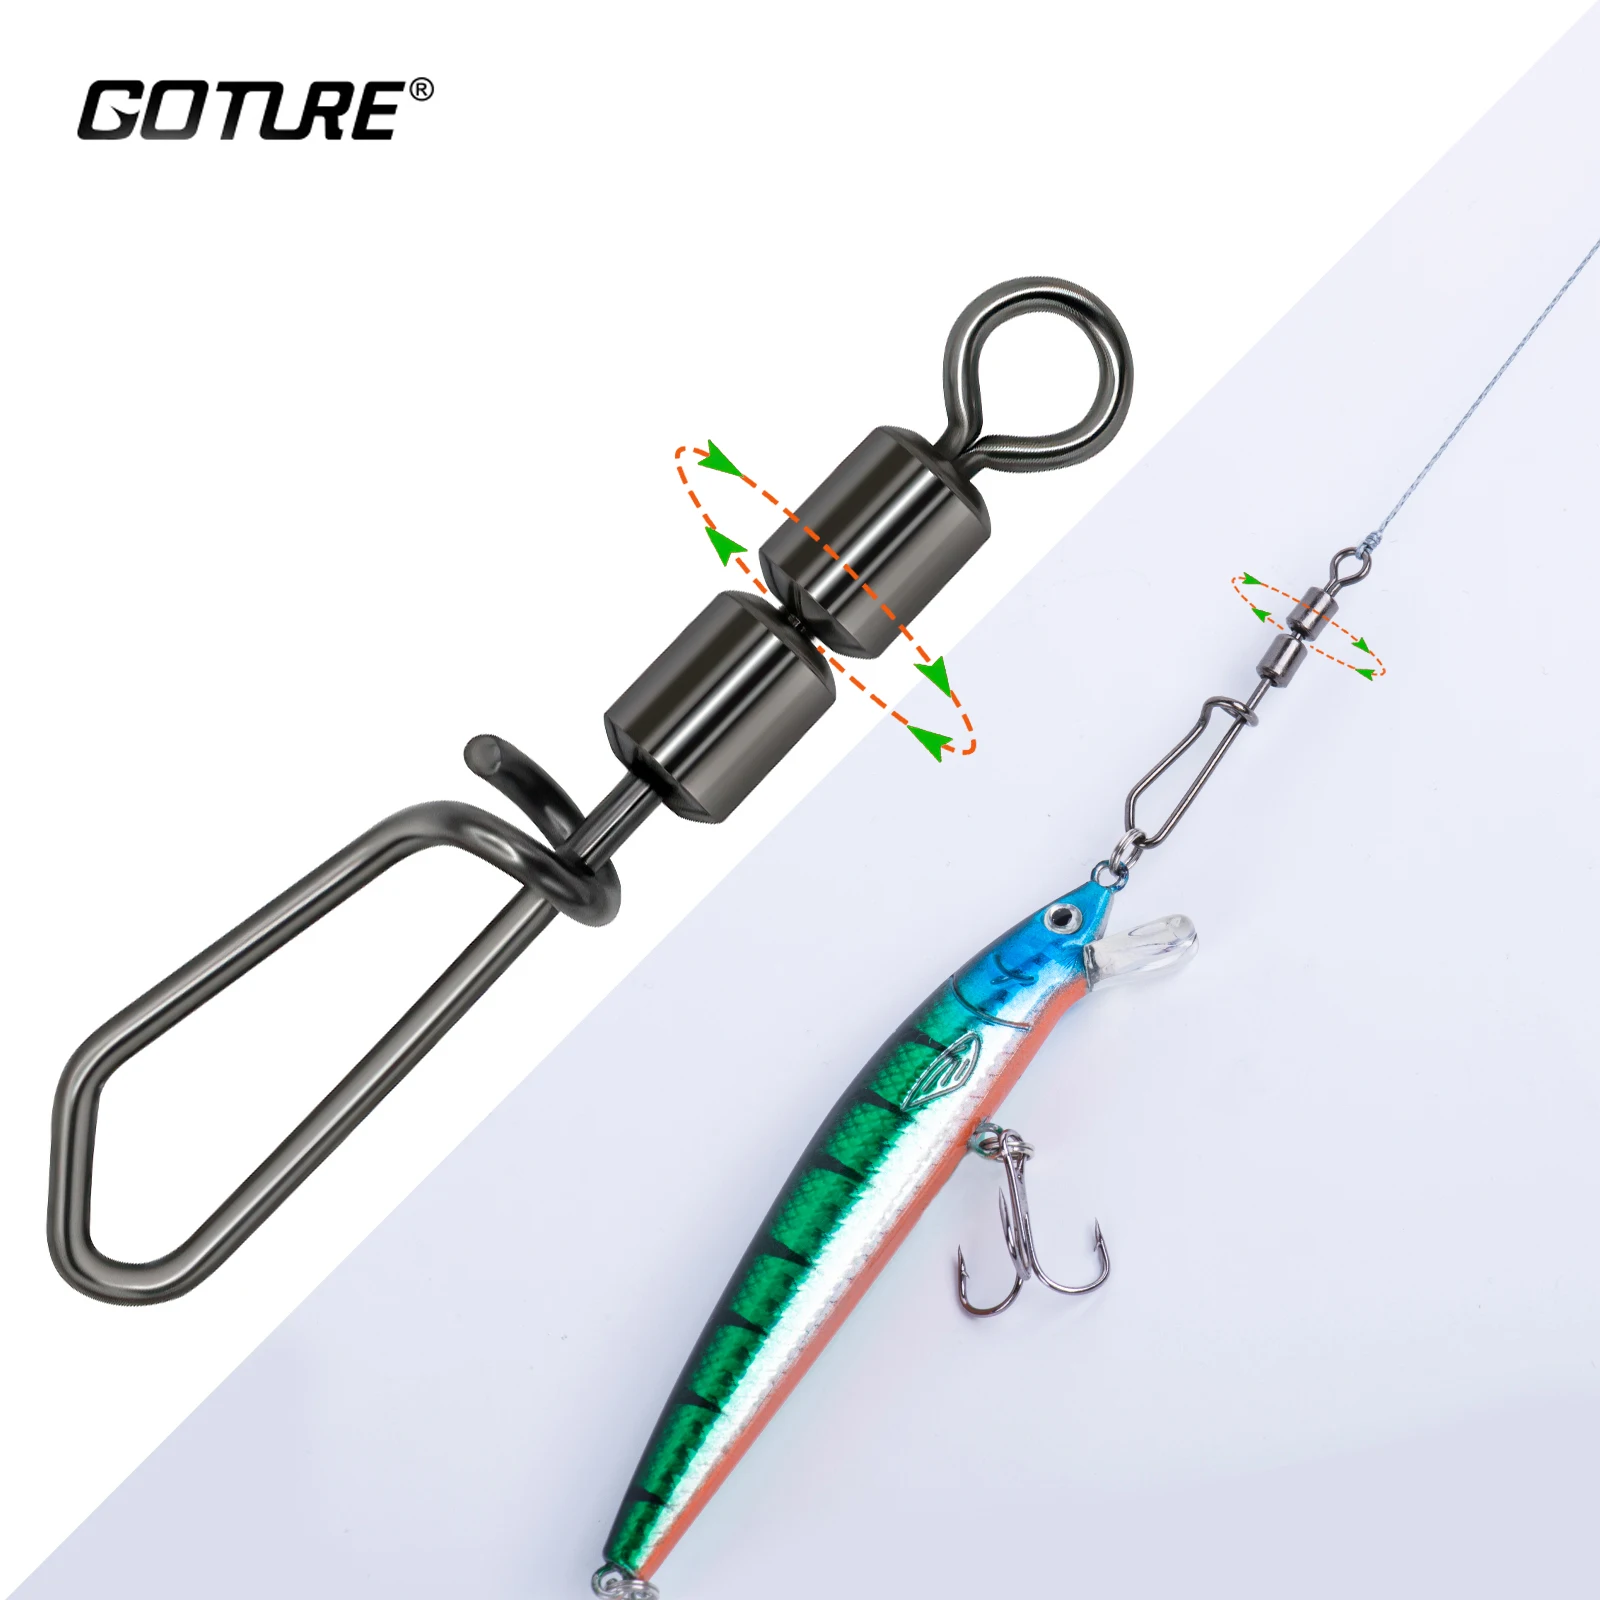 

Goture 20-30pcs Pike Fishhook Lure Fishing Accessories Connector Pin Bearing Rolling Swivel Stainless Steel Snap Swivels Tackle